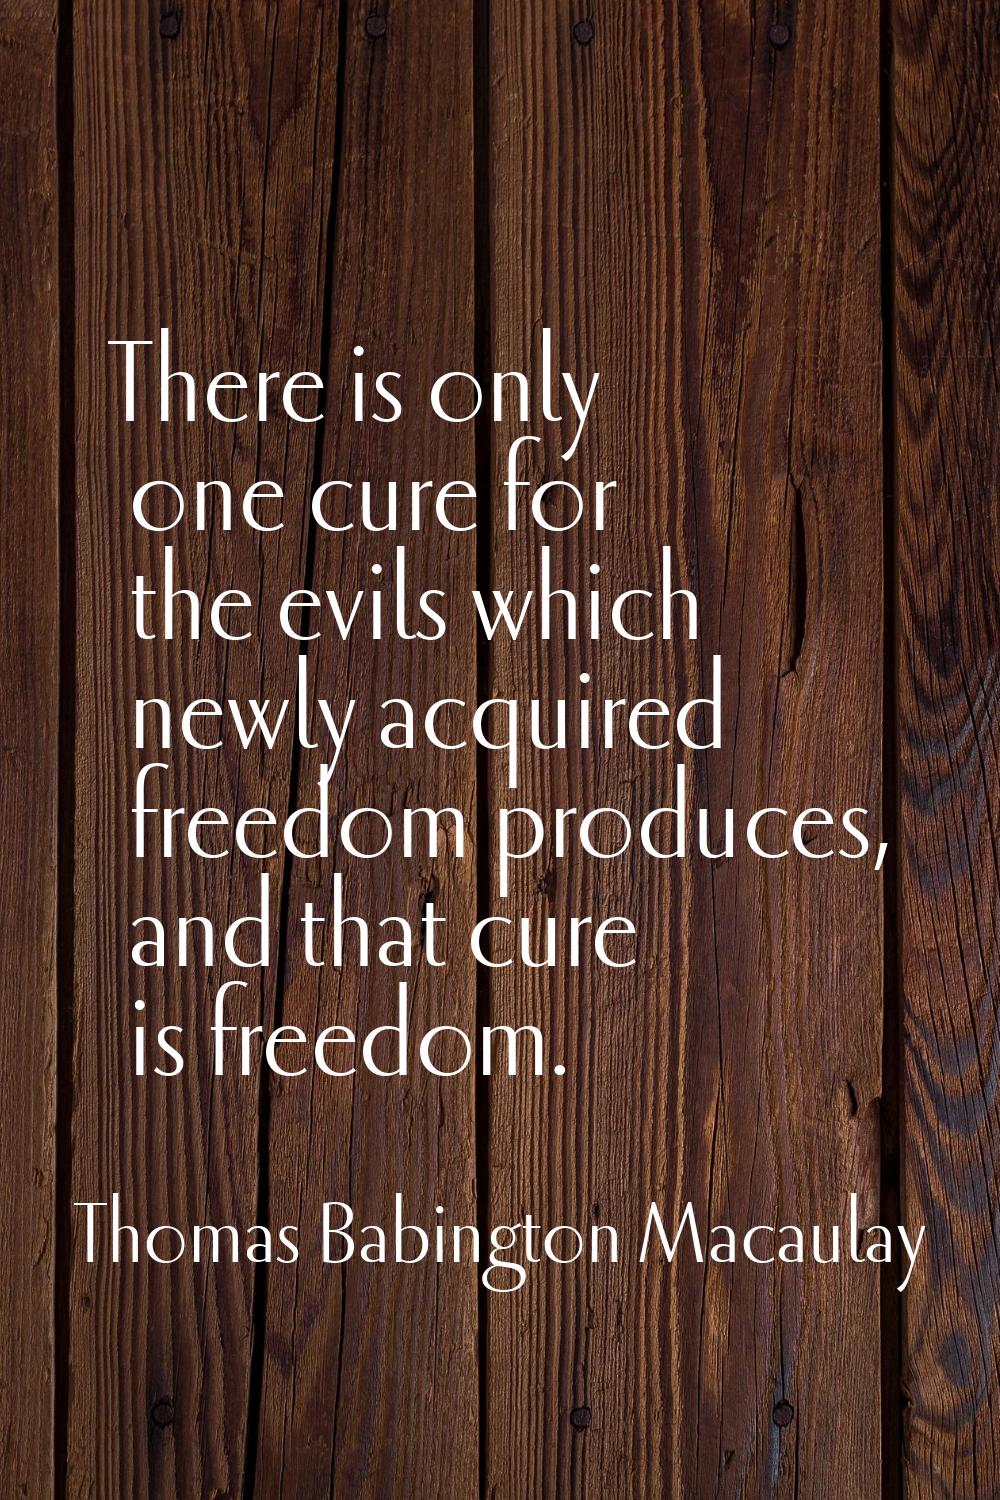 There is only one cure for the evils which newly acquired freedom produces, and that cure is freedo